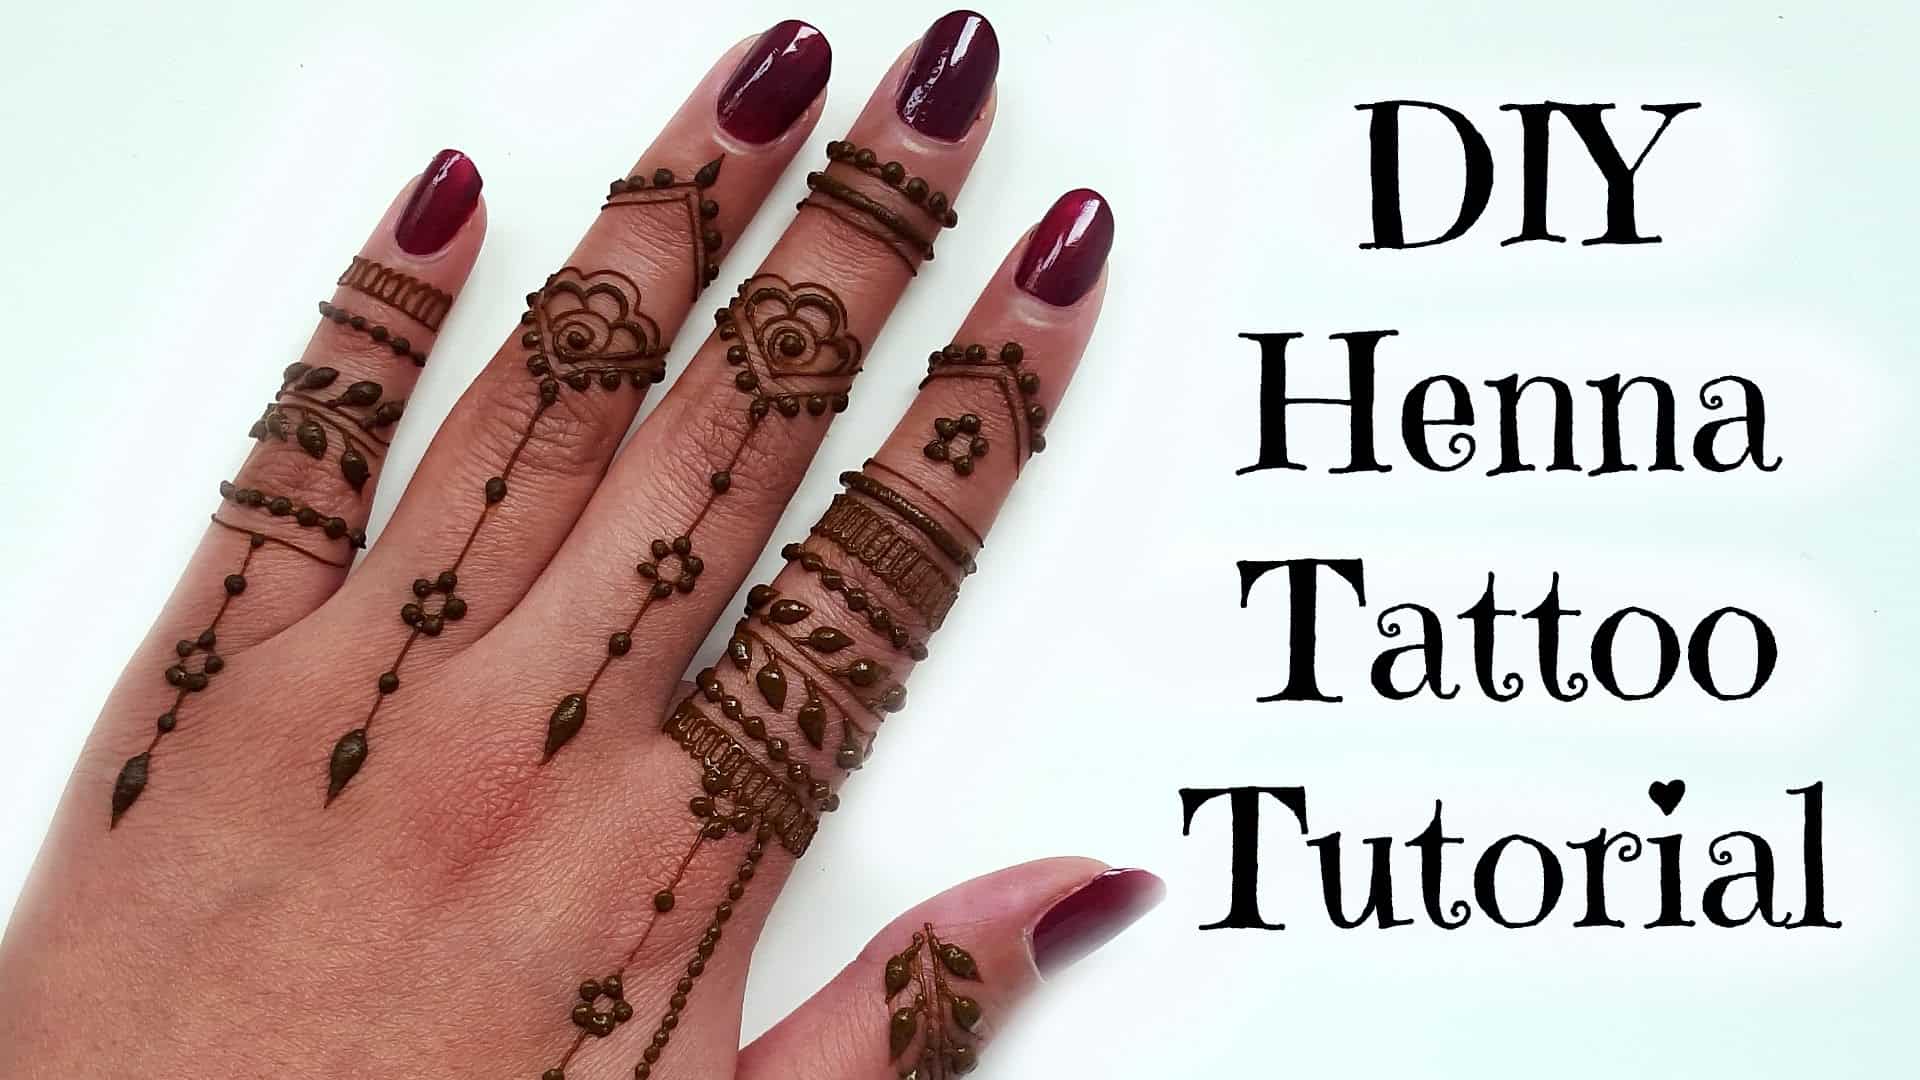 15 Simple Henna Tattoo Designs To Show Off In Warm Weather,House Interior Design Ideas Philippines